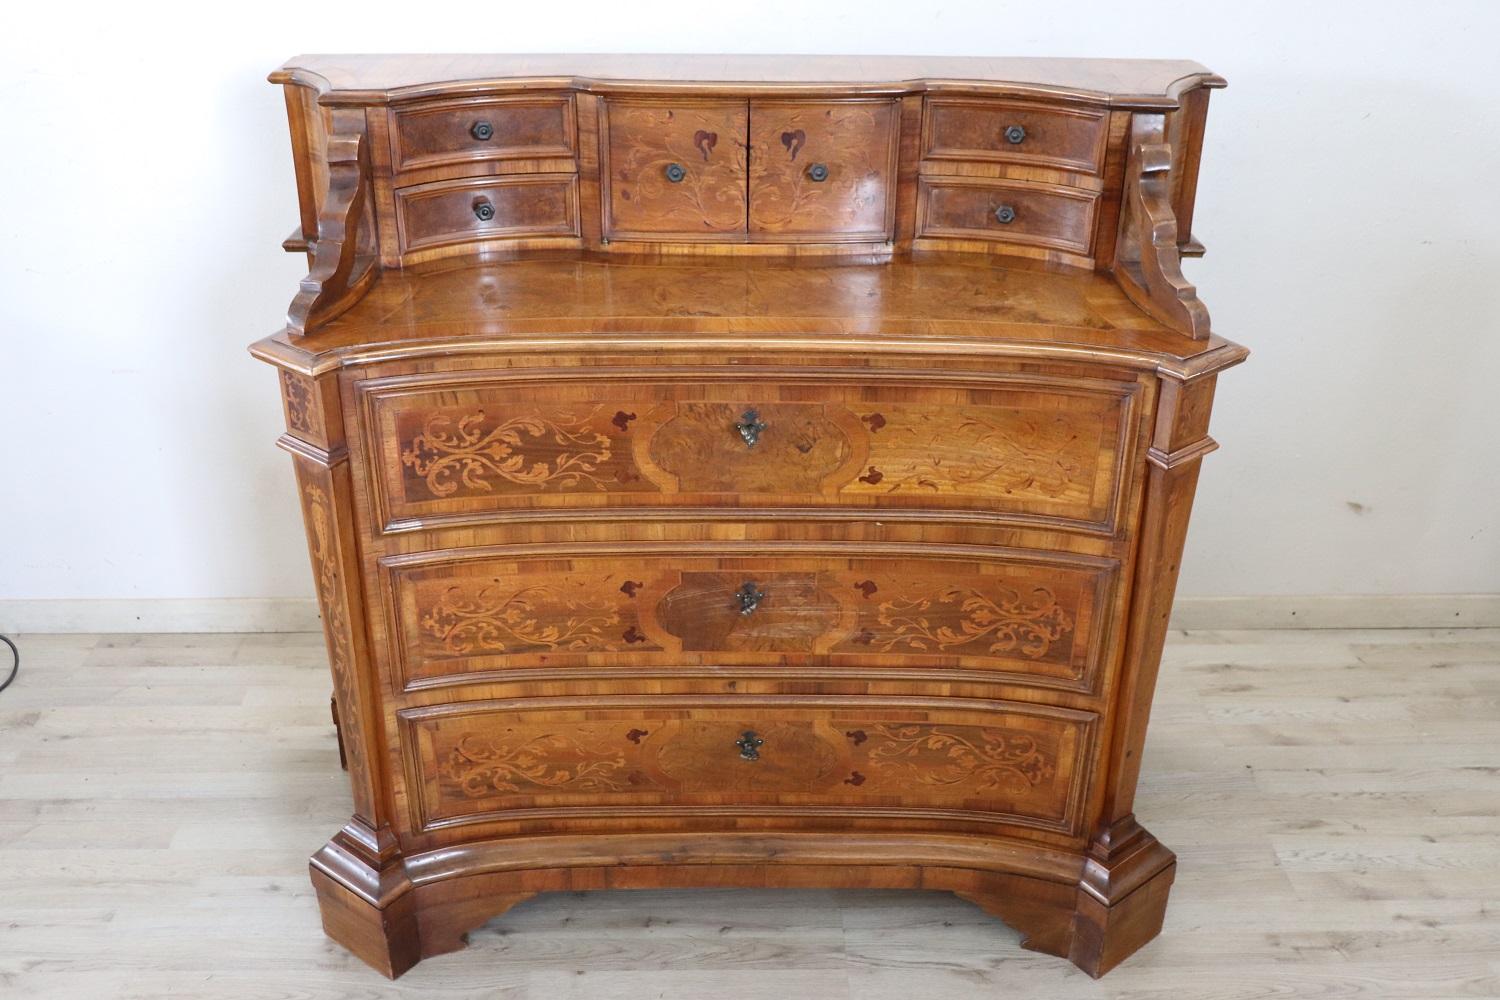 Louis XIV style italian furniture, 1950s. The fine walnut inlaid wood. Refined and rich inlay work of floral taste on each side of the piece of furniture. Particular rounded shape. On the front there are three comfortable large drawers. On the top a